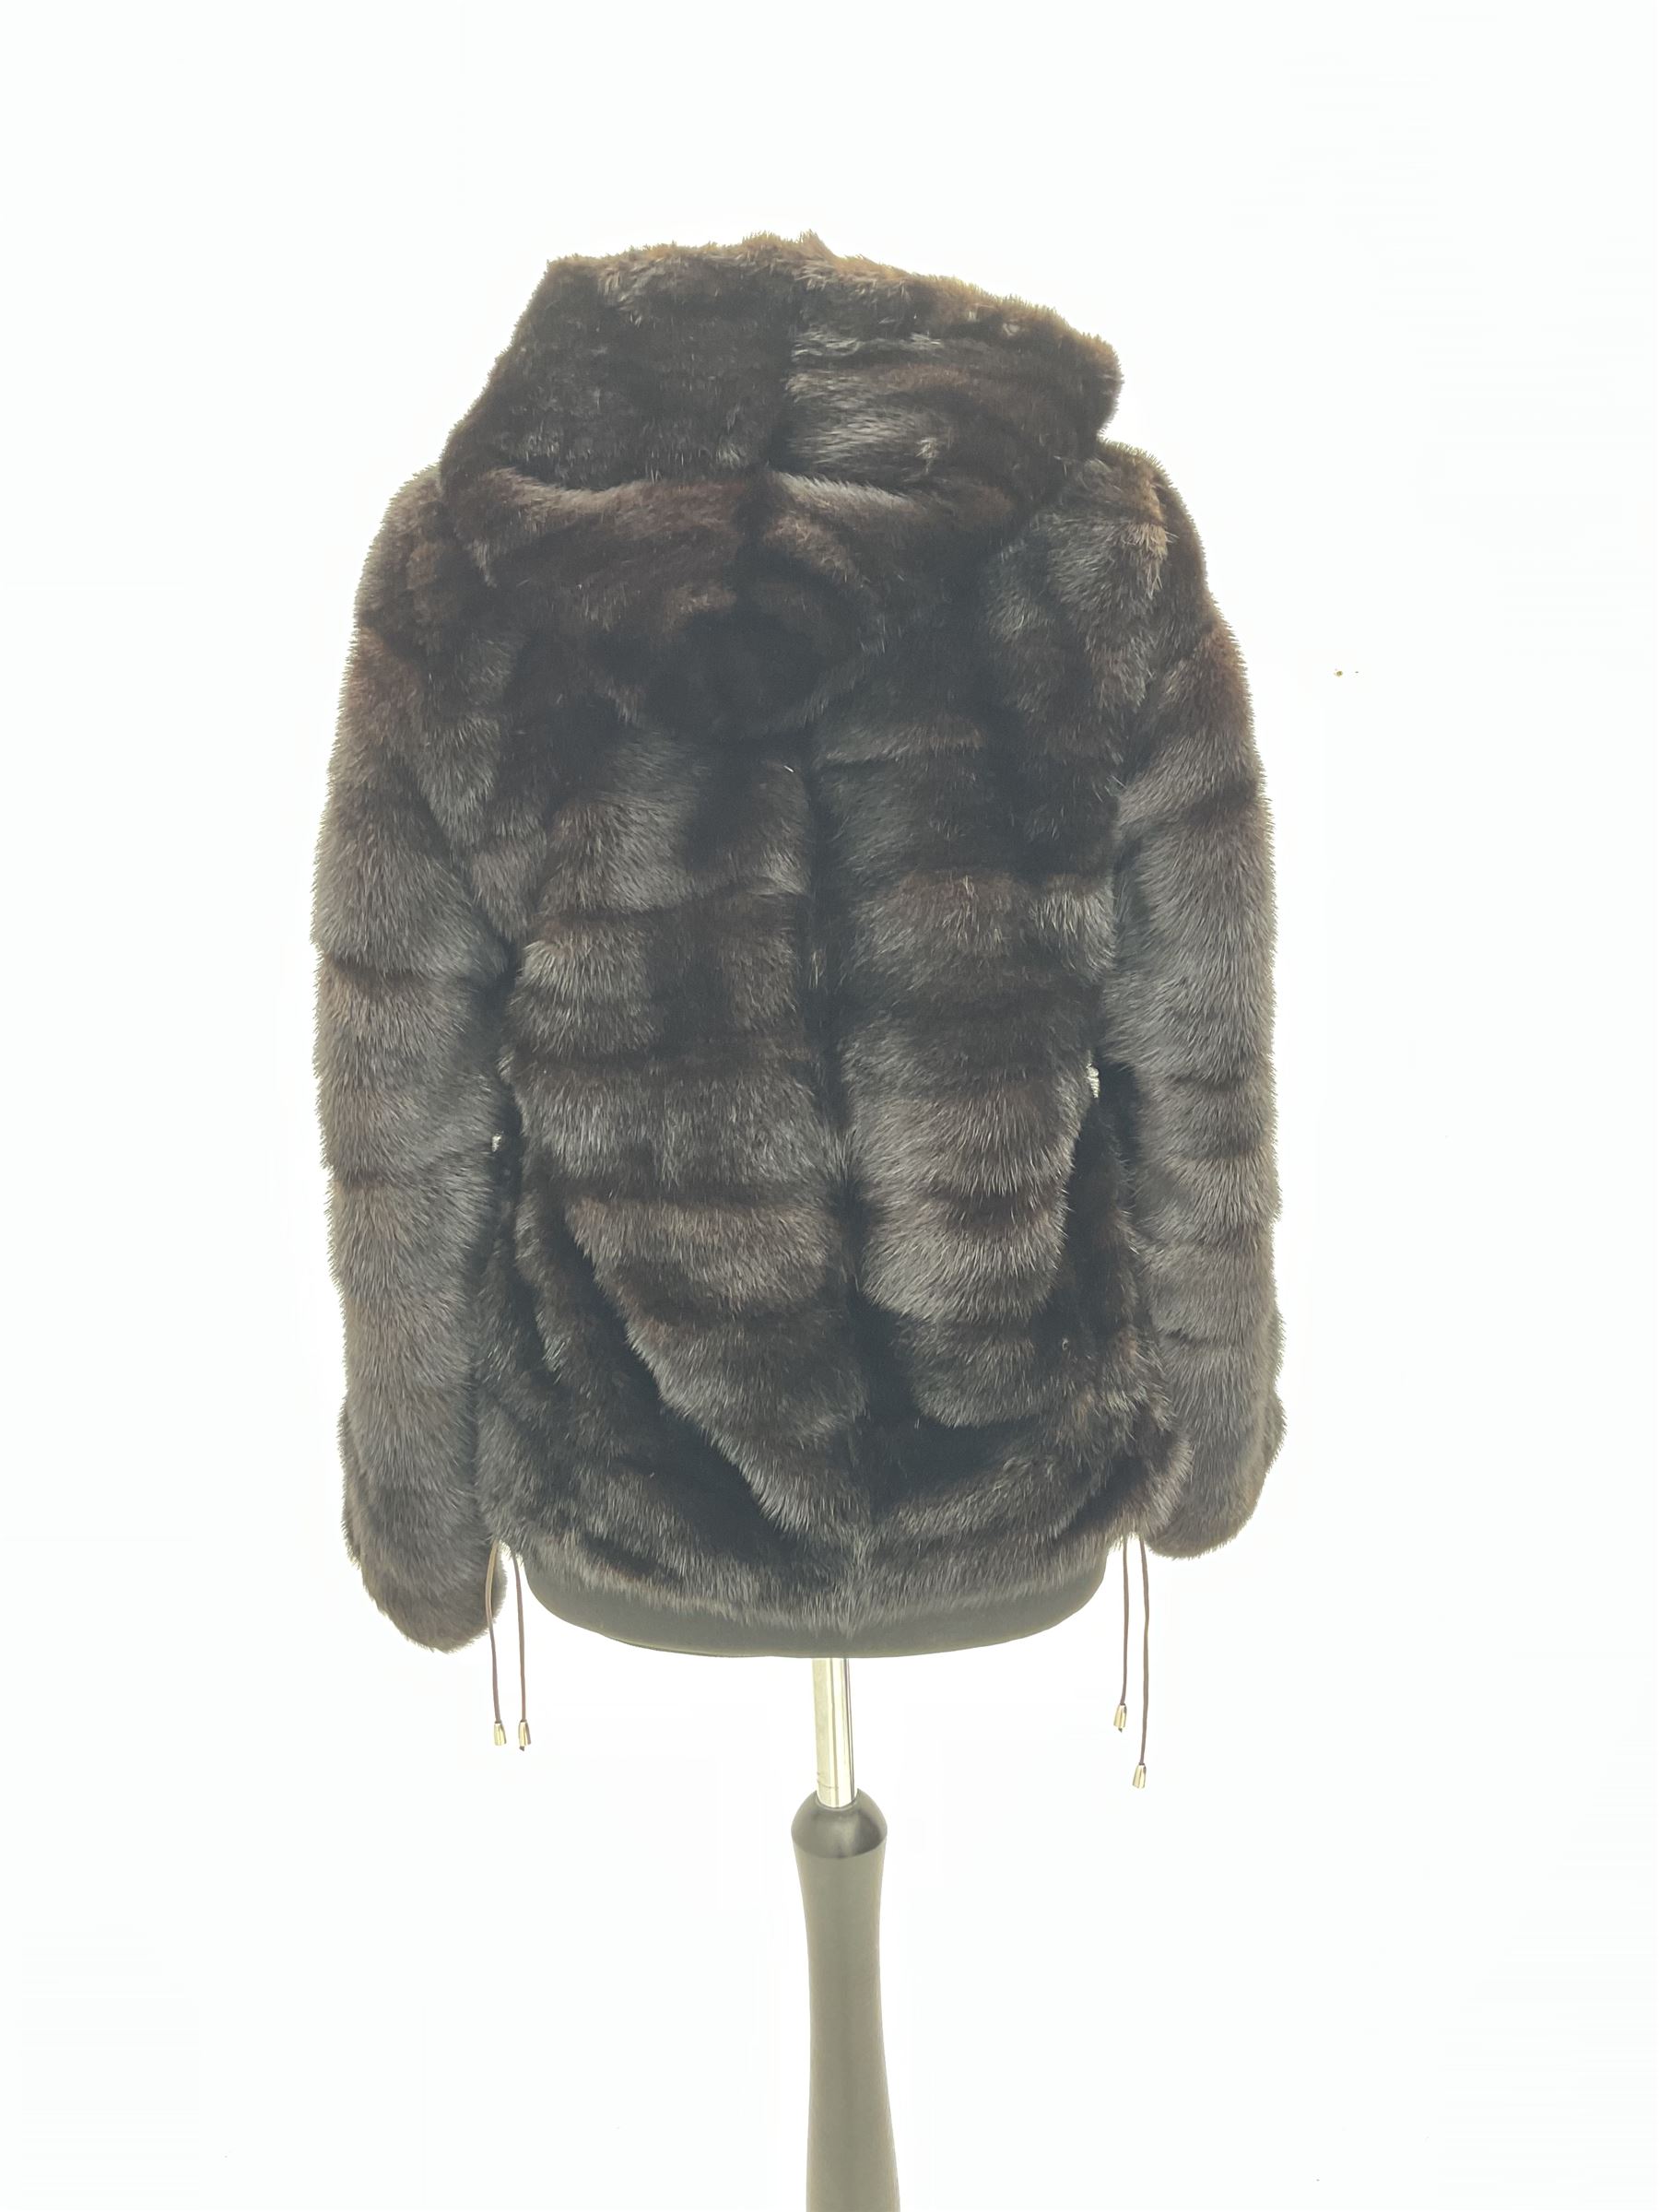 Modern cut lightweight nearly black mink jacket with integral hood - Image 4 of 6